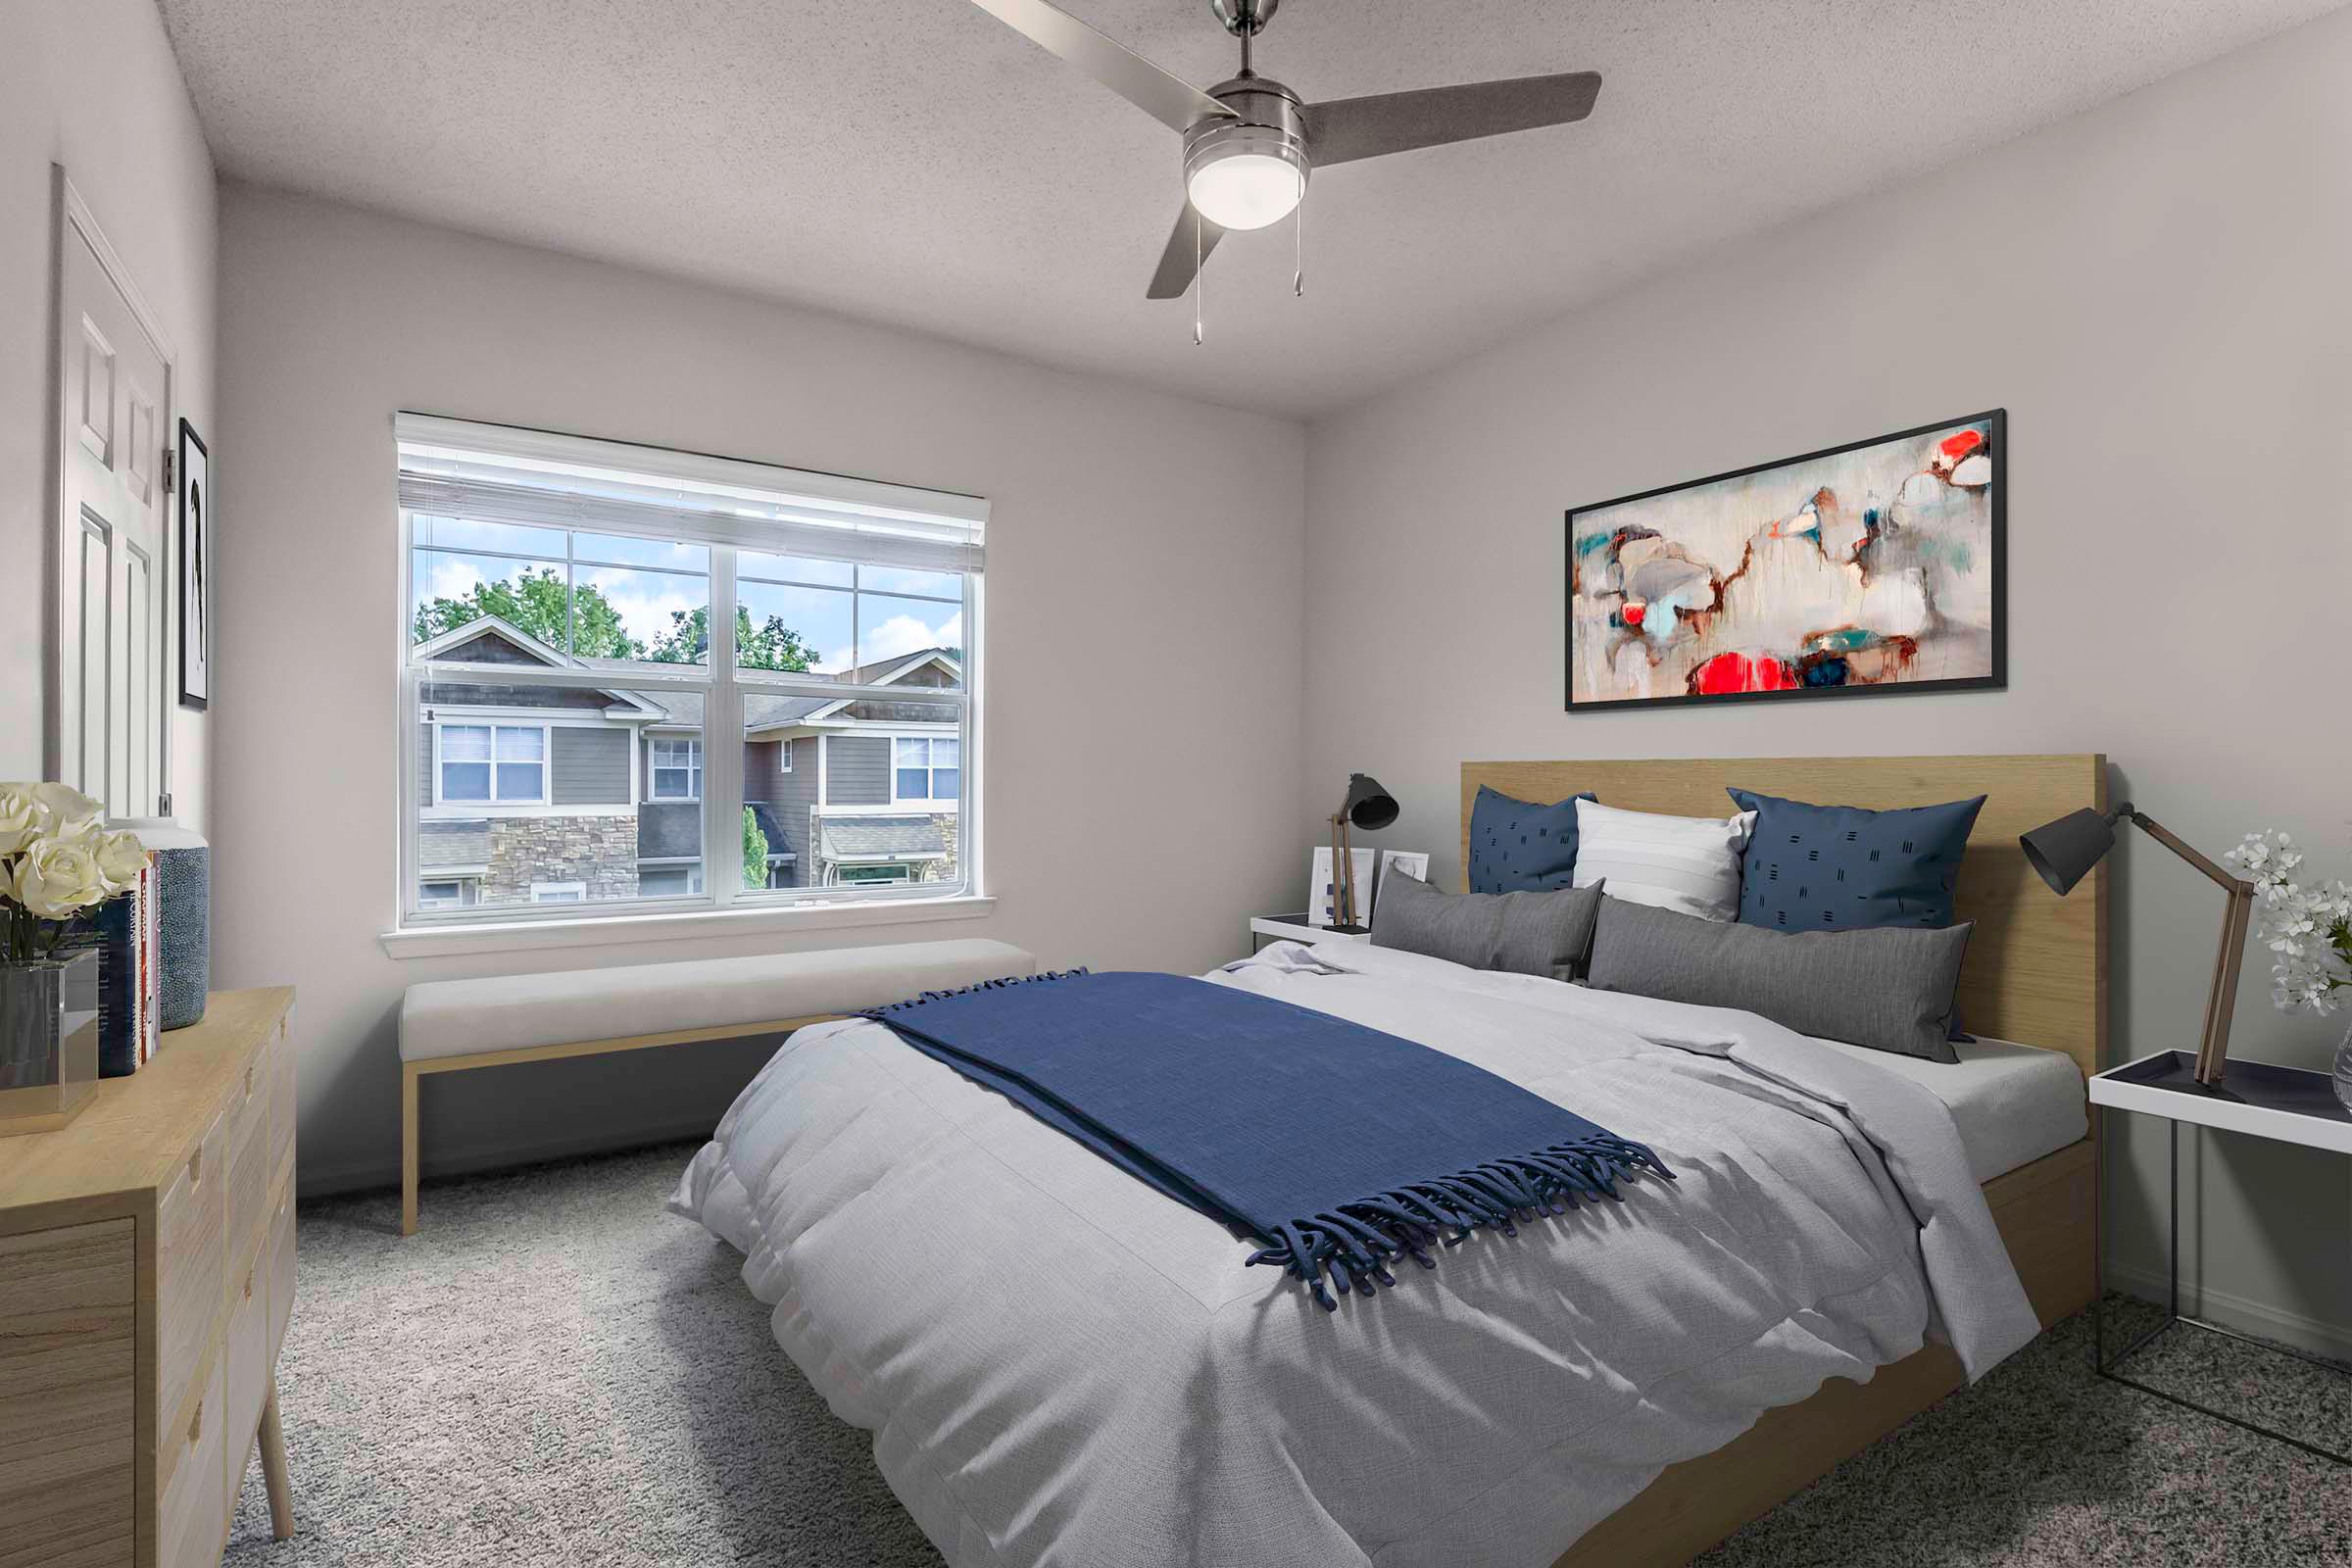 Townhome bedroom with ceiling fan and carpet flooring